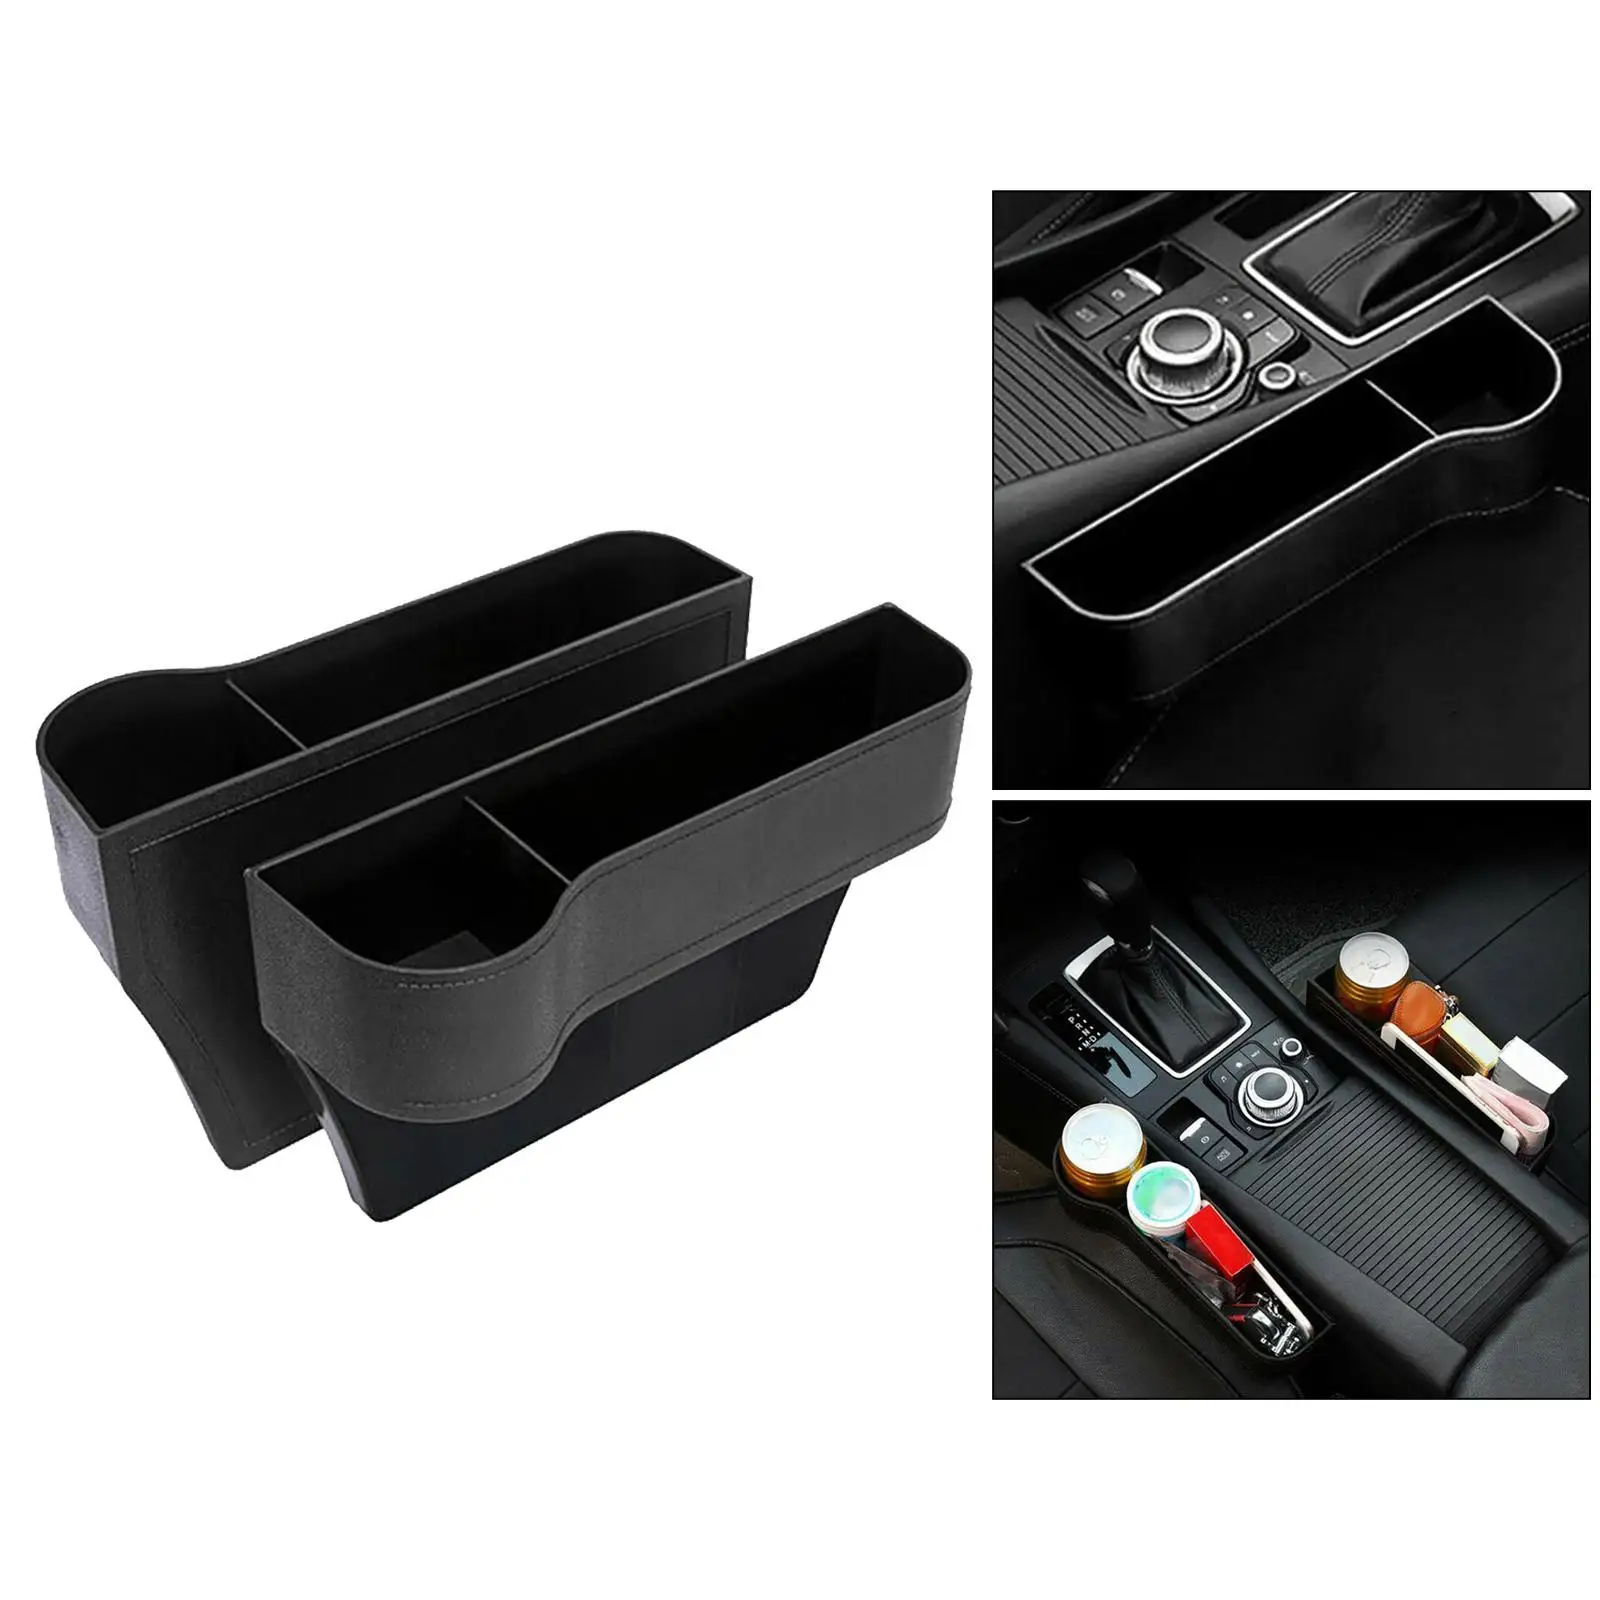  Fillers, 2 Packs  Organizer and cup Holder,  between Seats Organizer for Cellphones, Keys,, Sunglasses